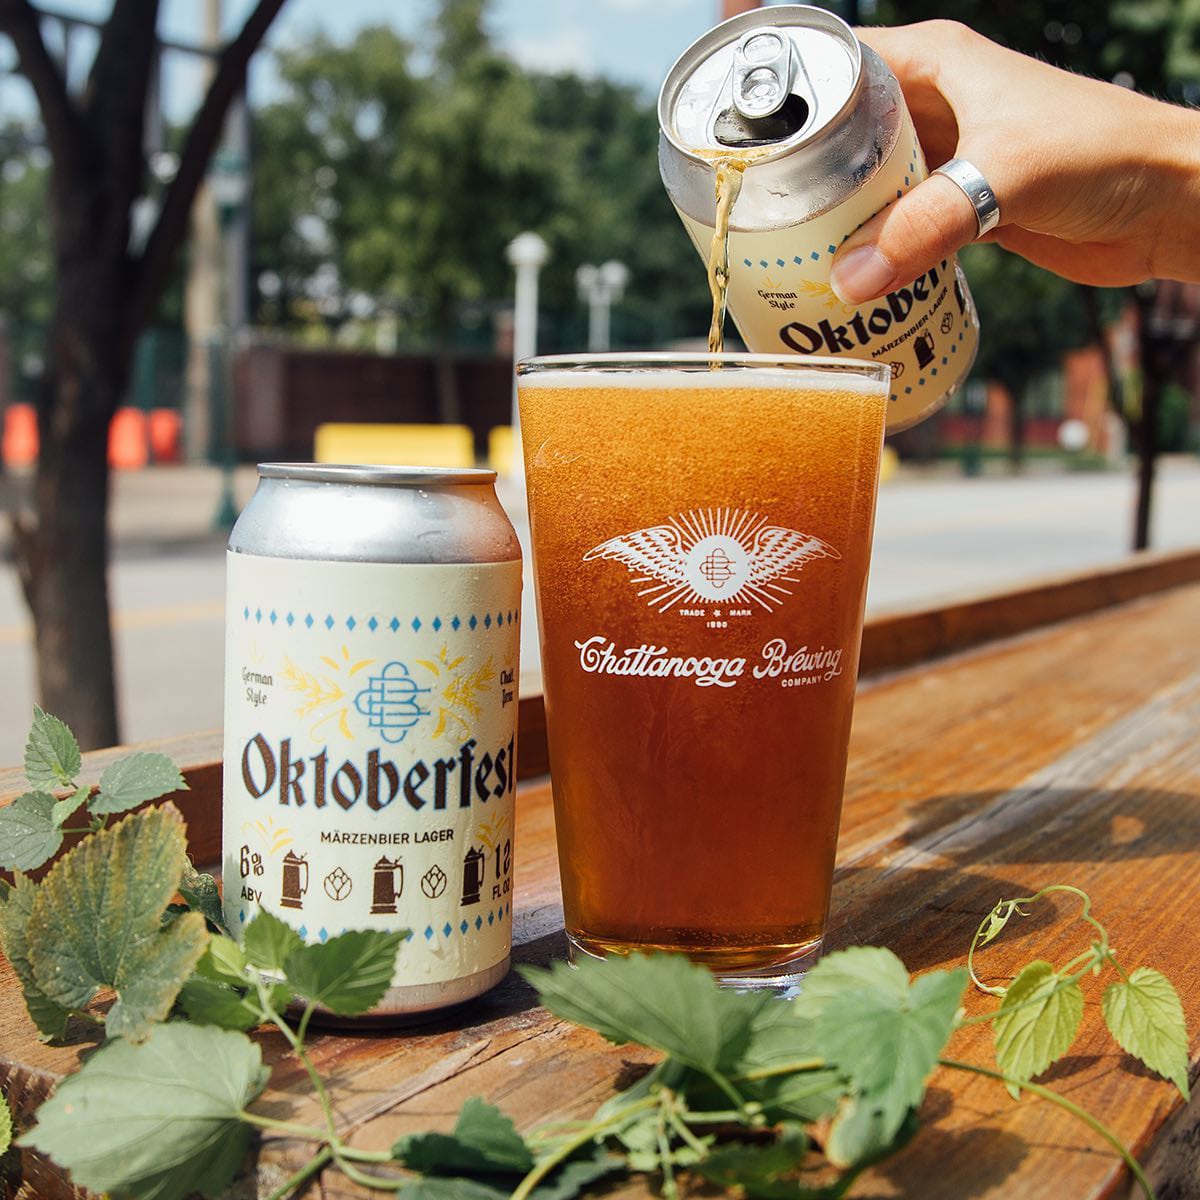 Okotberfest from Chattanooga Brewing Company 